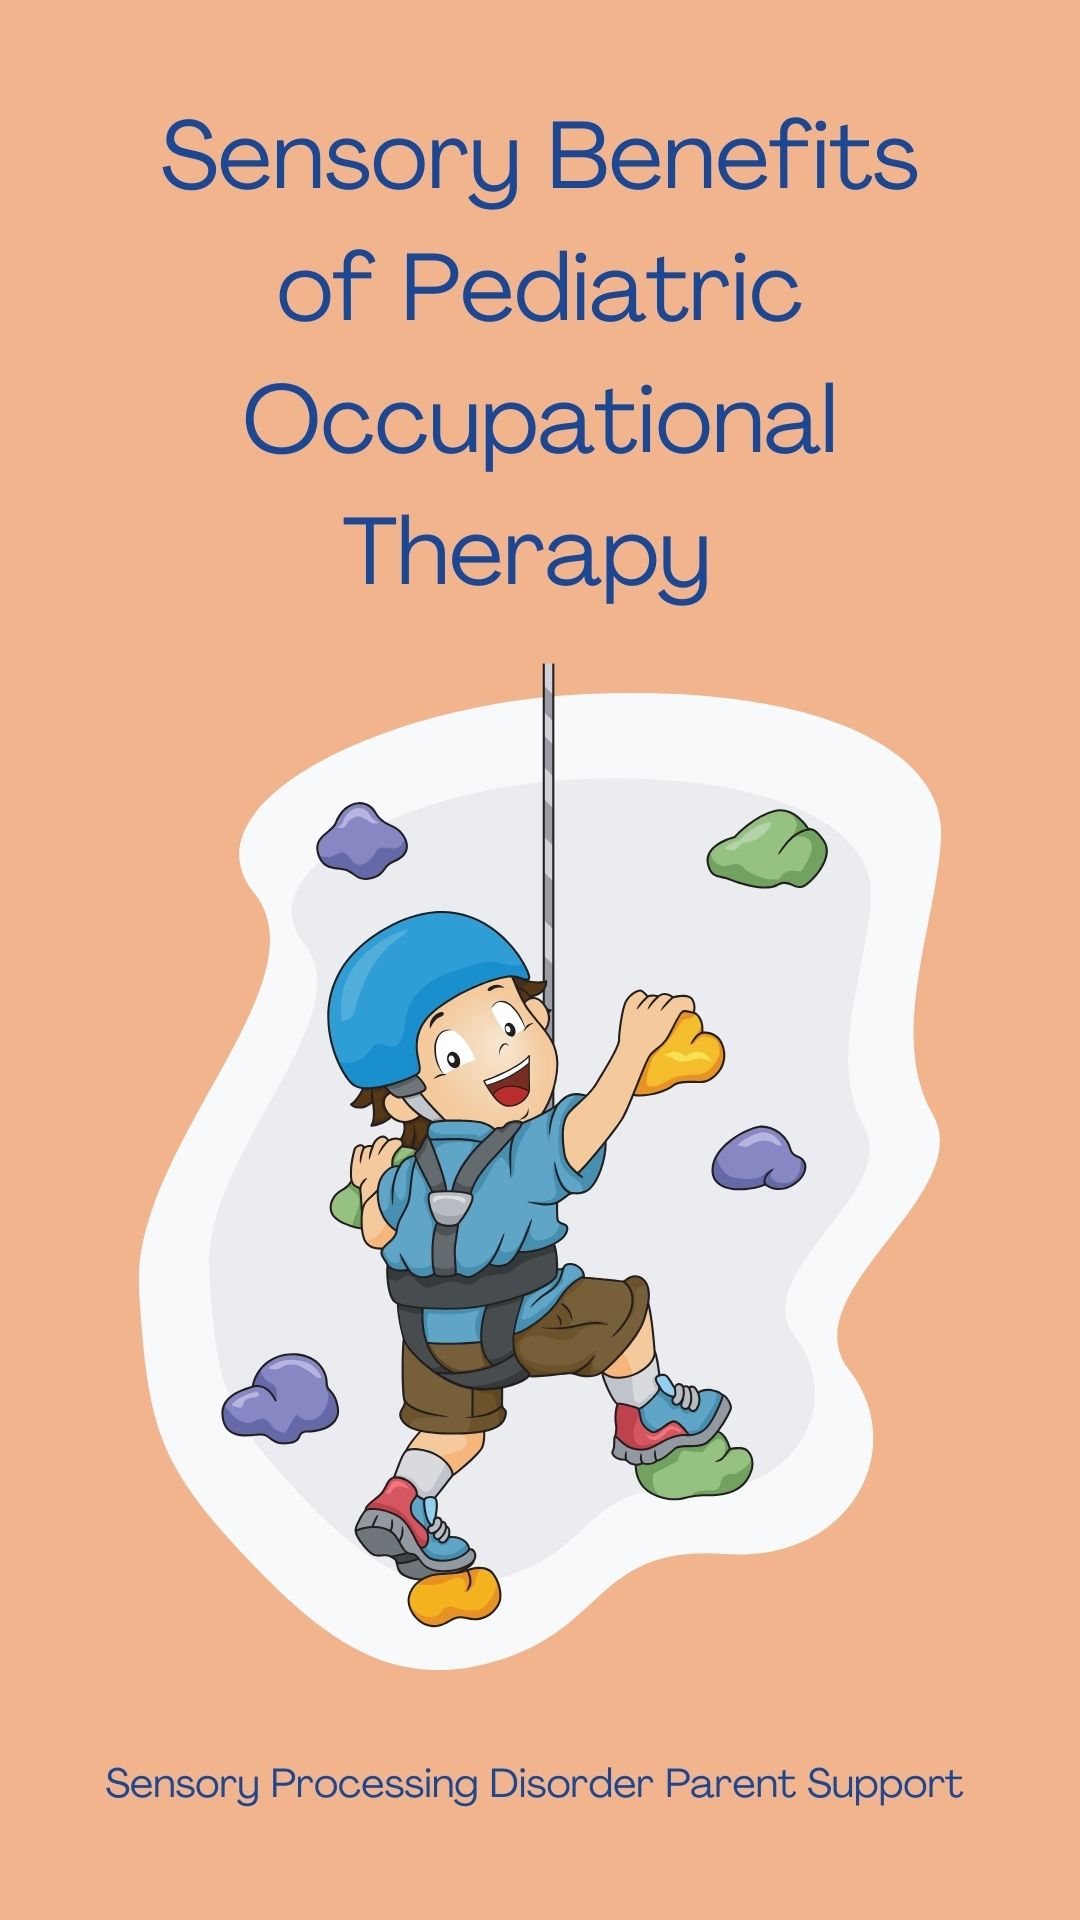 Sensory Benefits of Pediatric Occupational Therapy